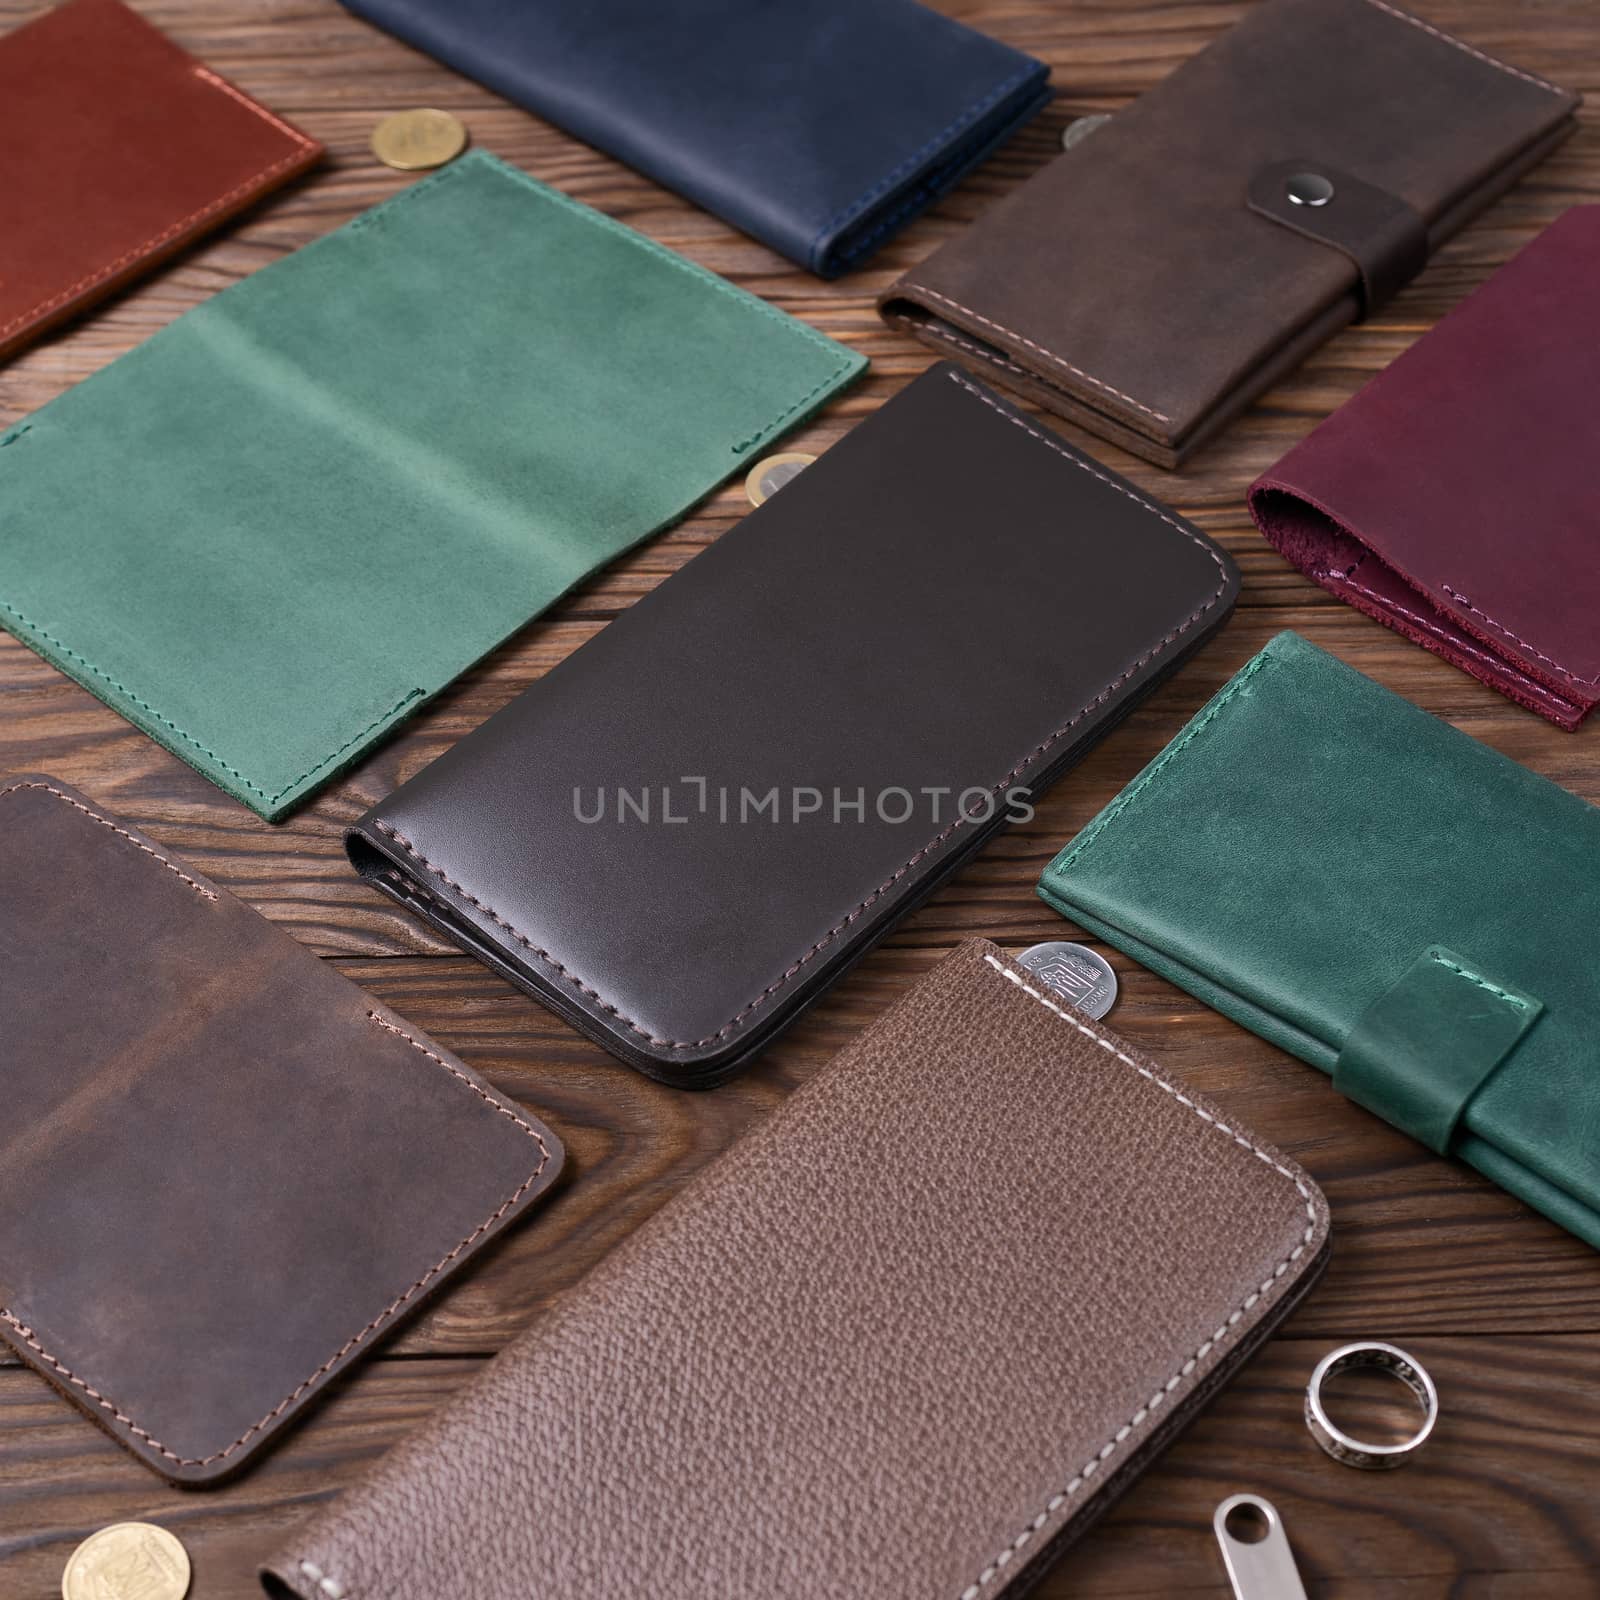 Brown gloss handmade leather porte-monnaie surrounded by other leather accessories on wooden textured background. Side view. Stock photo of luxury accessories.